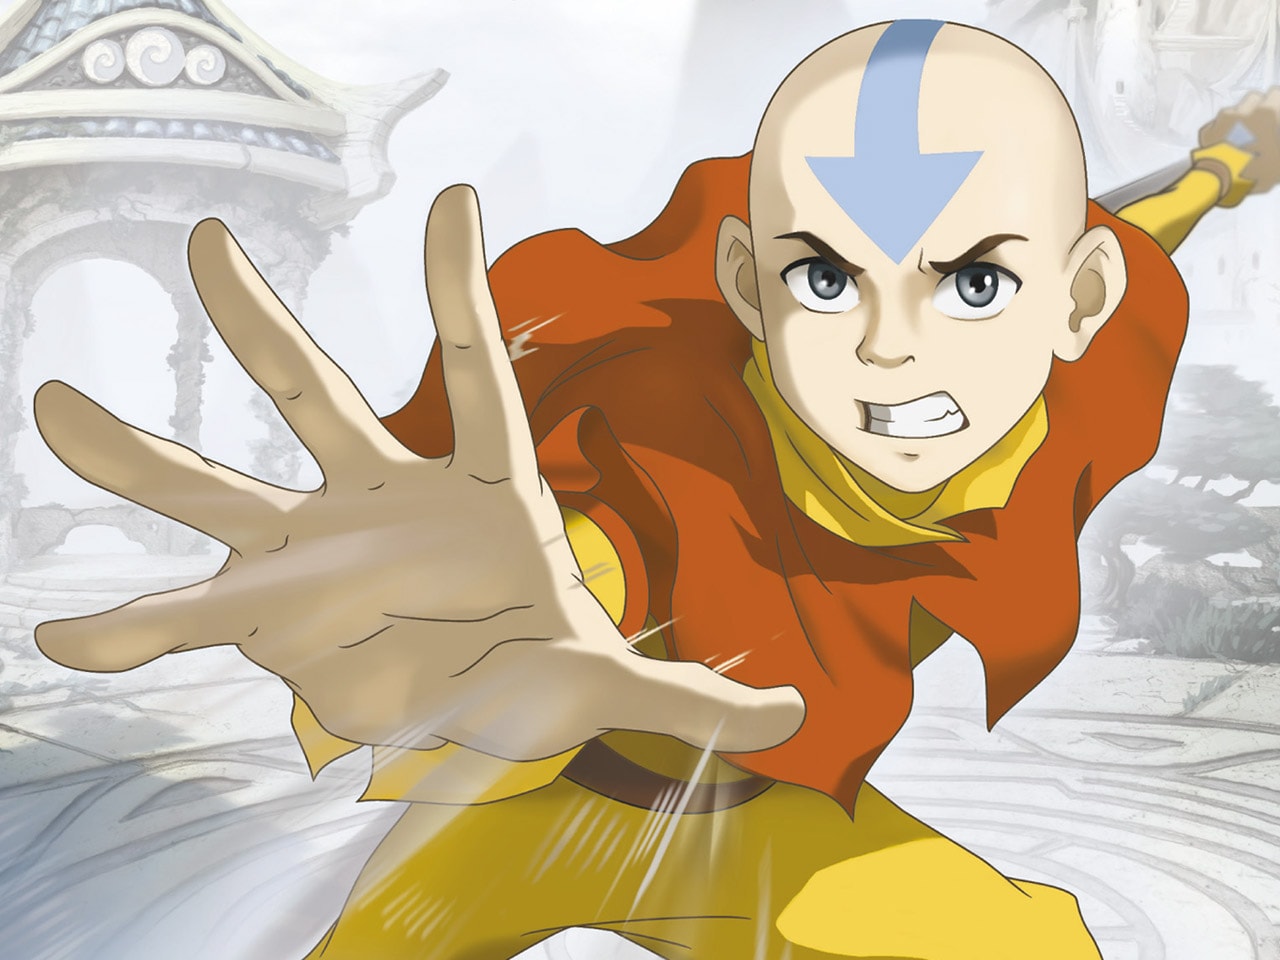 Avatar the last airbender games pc